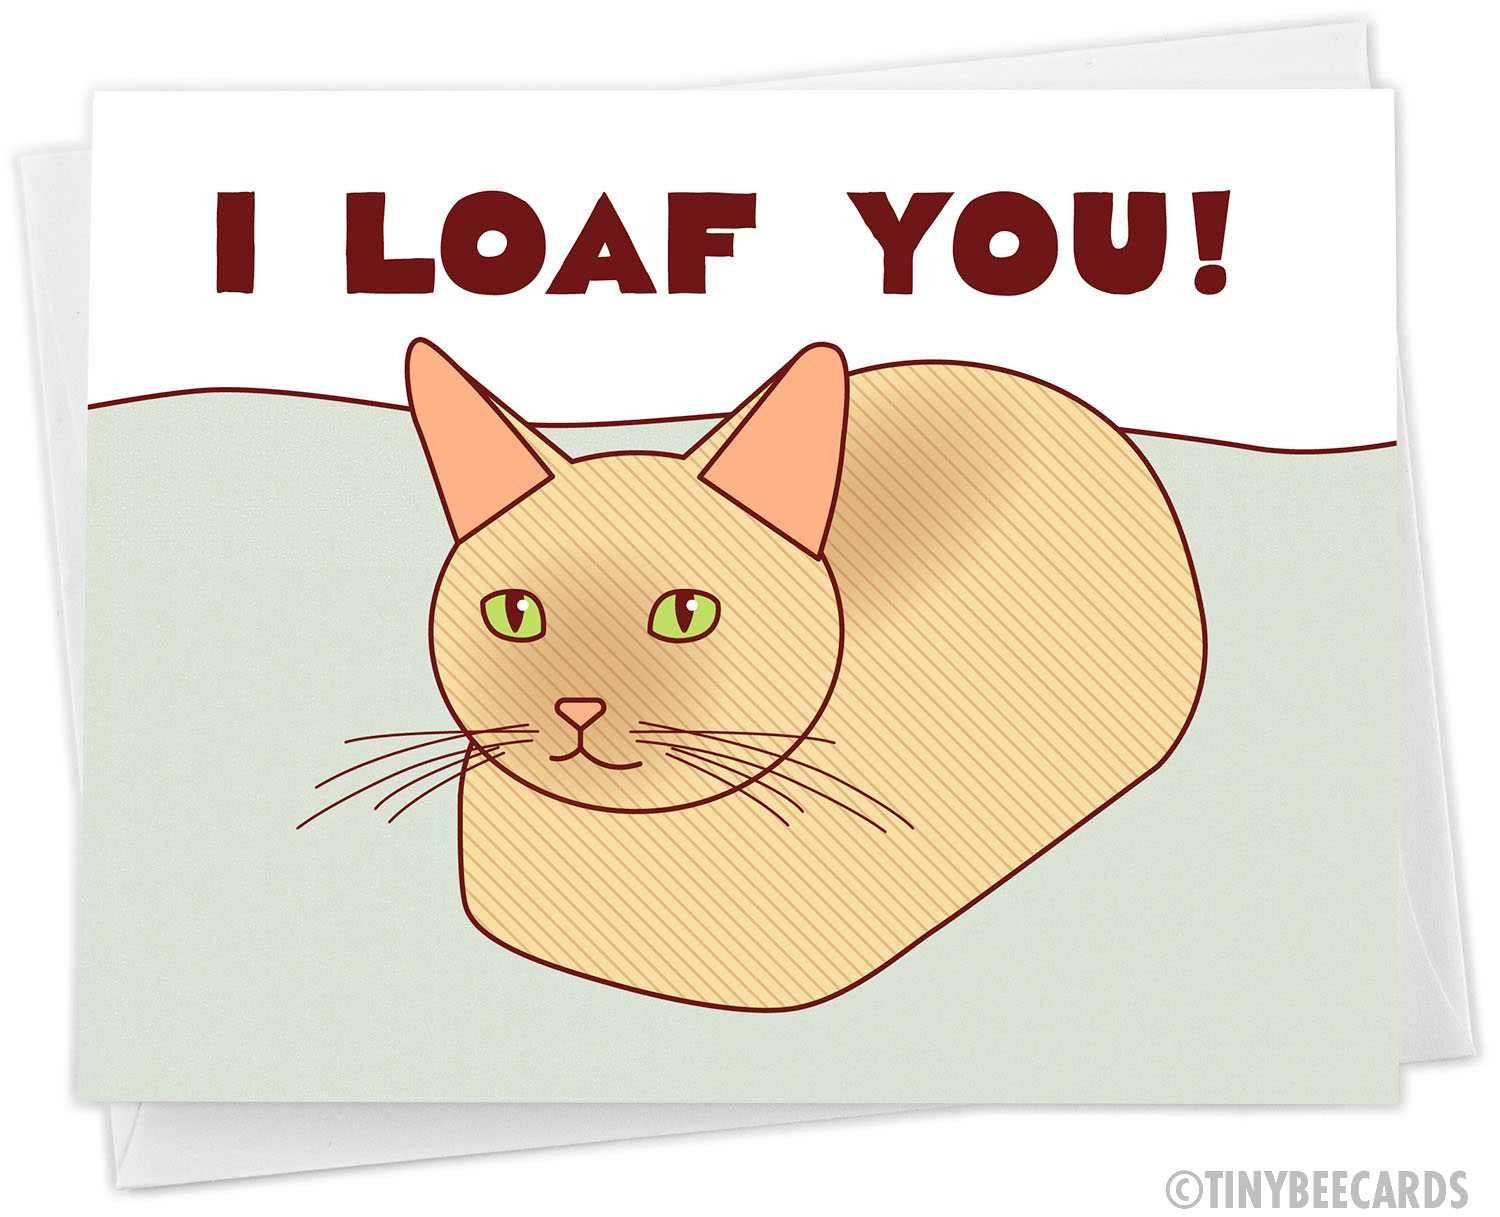 Cat Anniversary Card "I Loaf You"